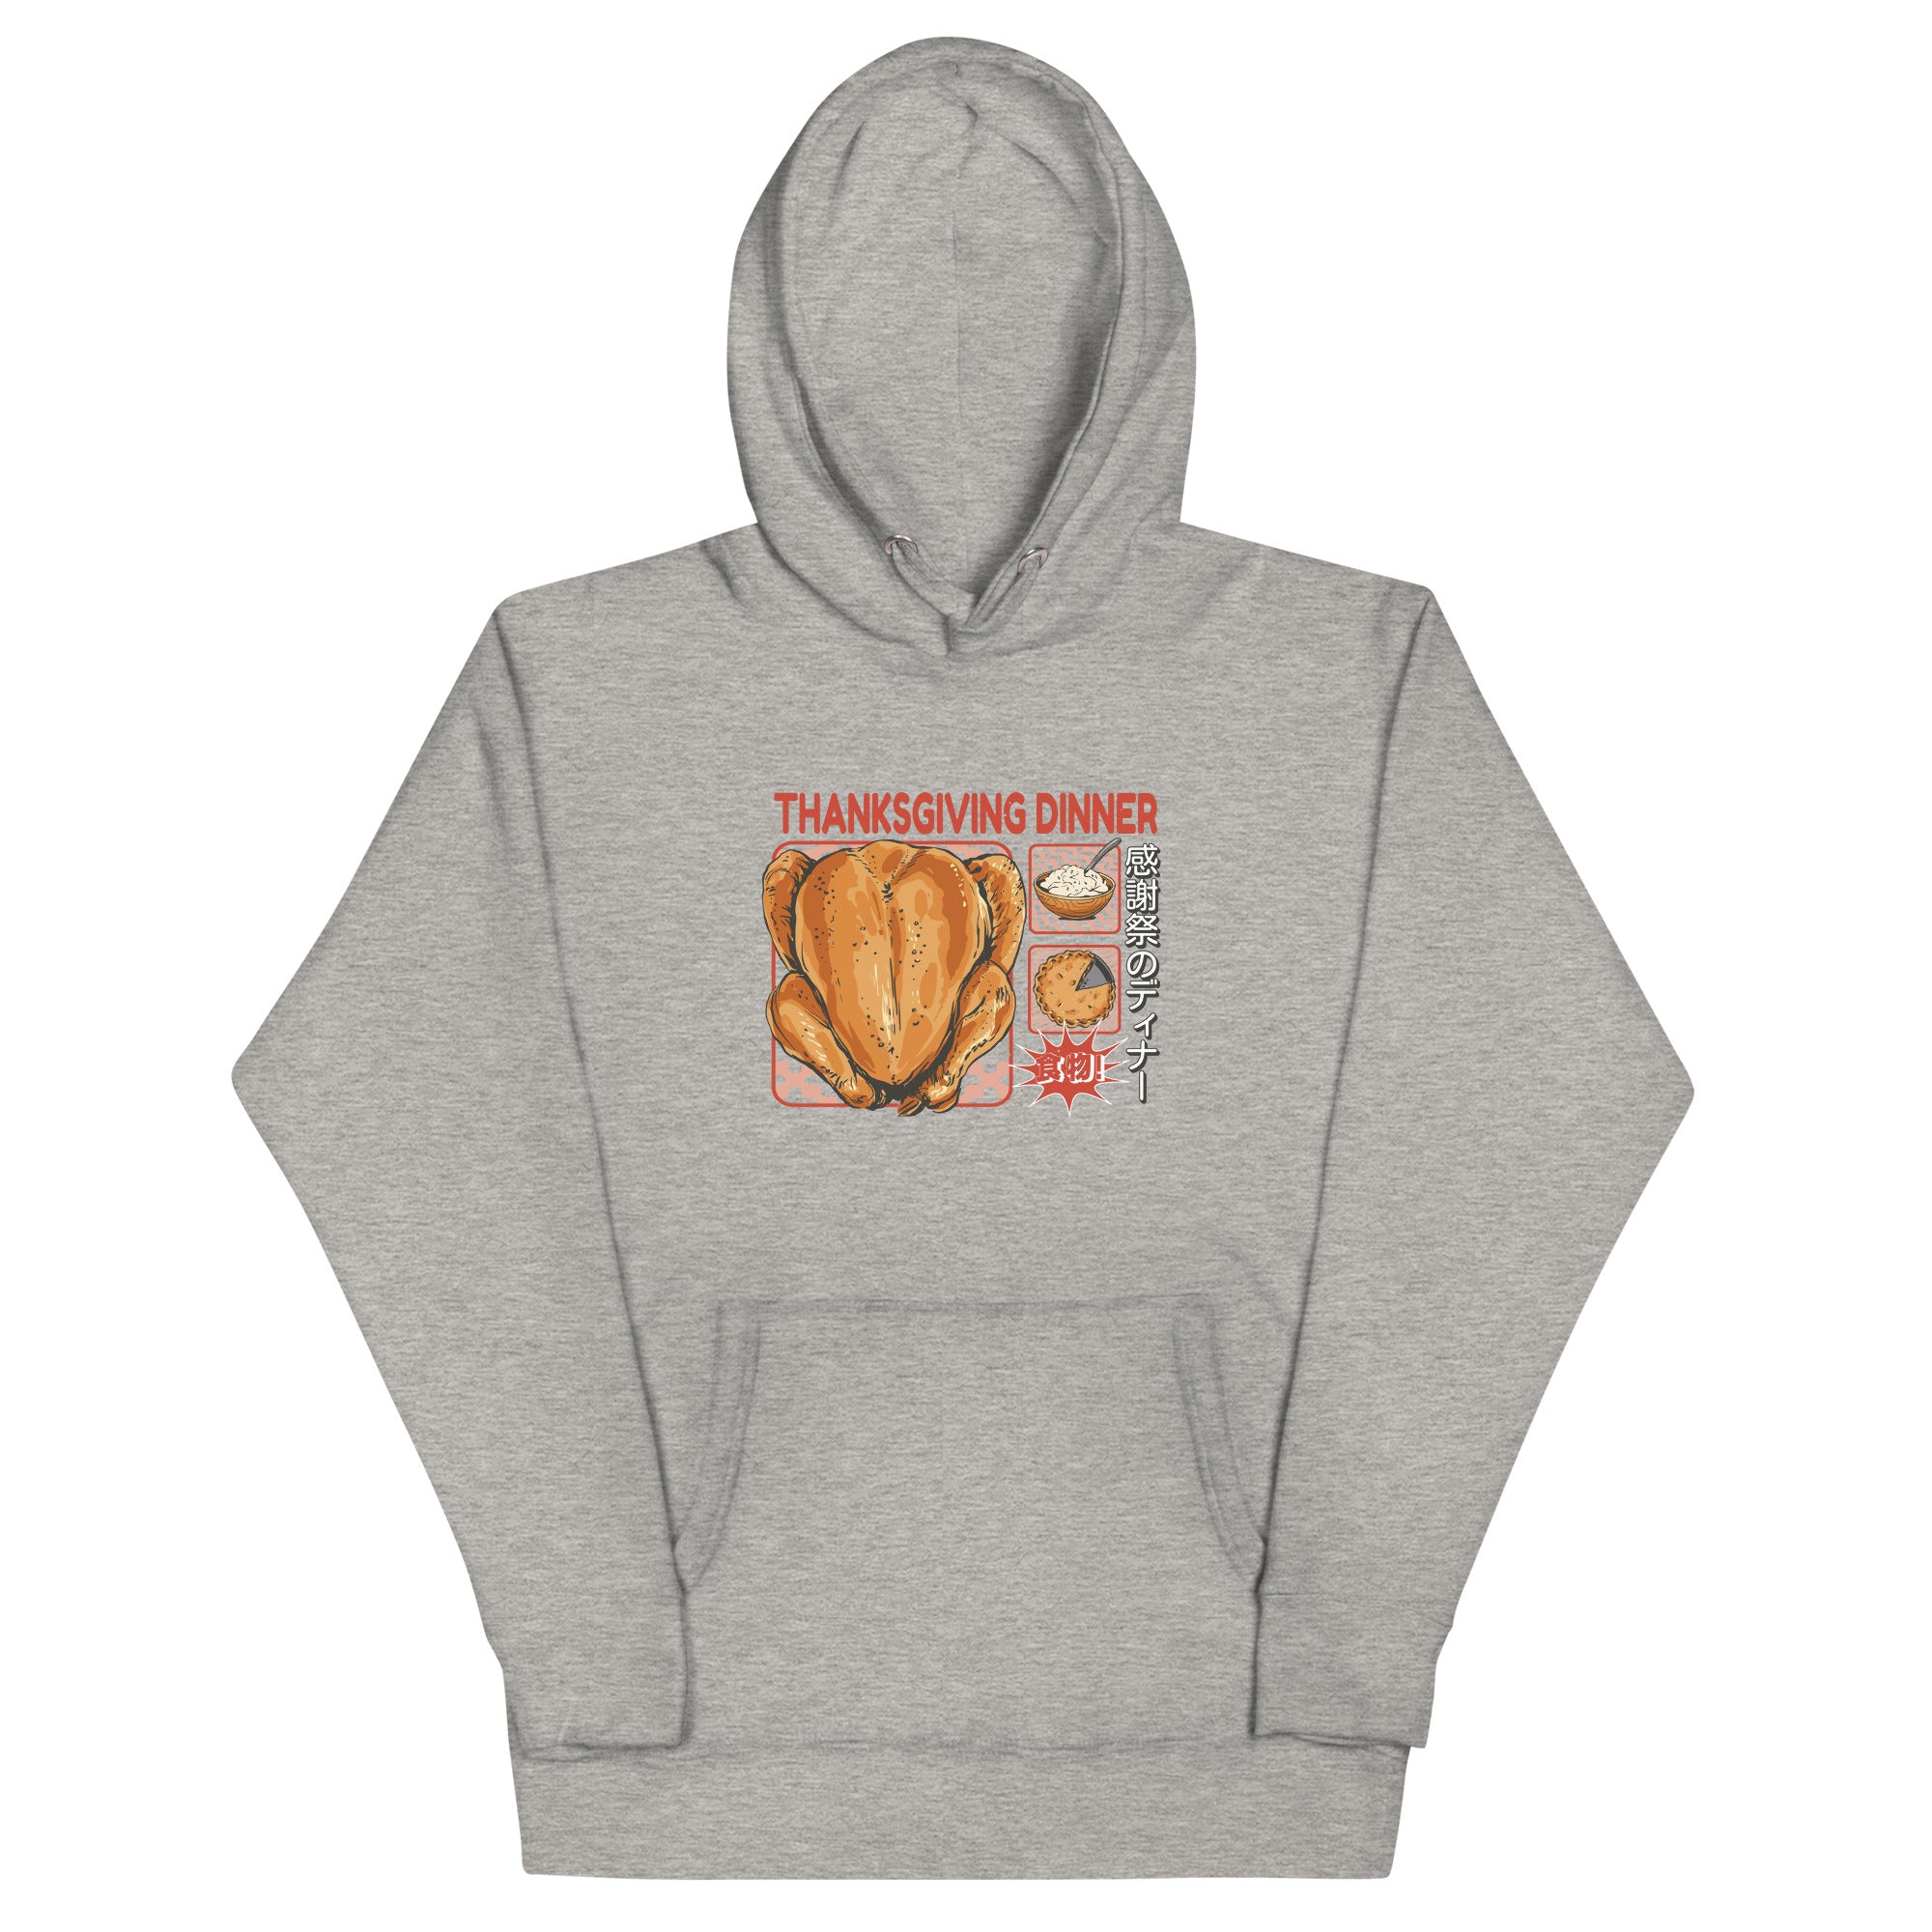 Front of Japanese Thanksgiving Hoodie in Carbon Grey: The front view of a medium gray hoodie with a meticulously illustrated Japanese Thanksgiving graphic, featuring a roast chicken, Japanese potato salad, and an apple pie.